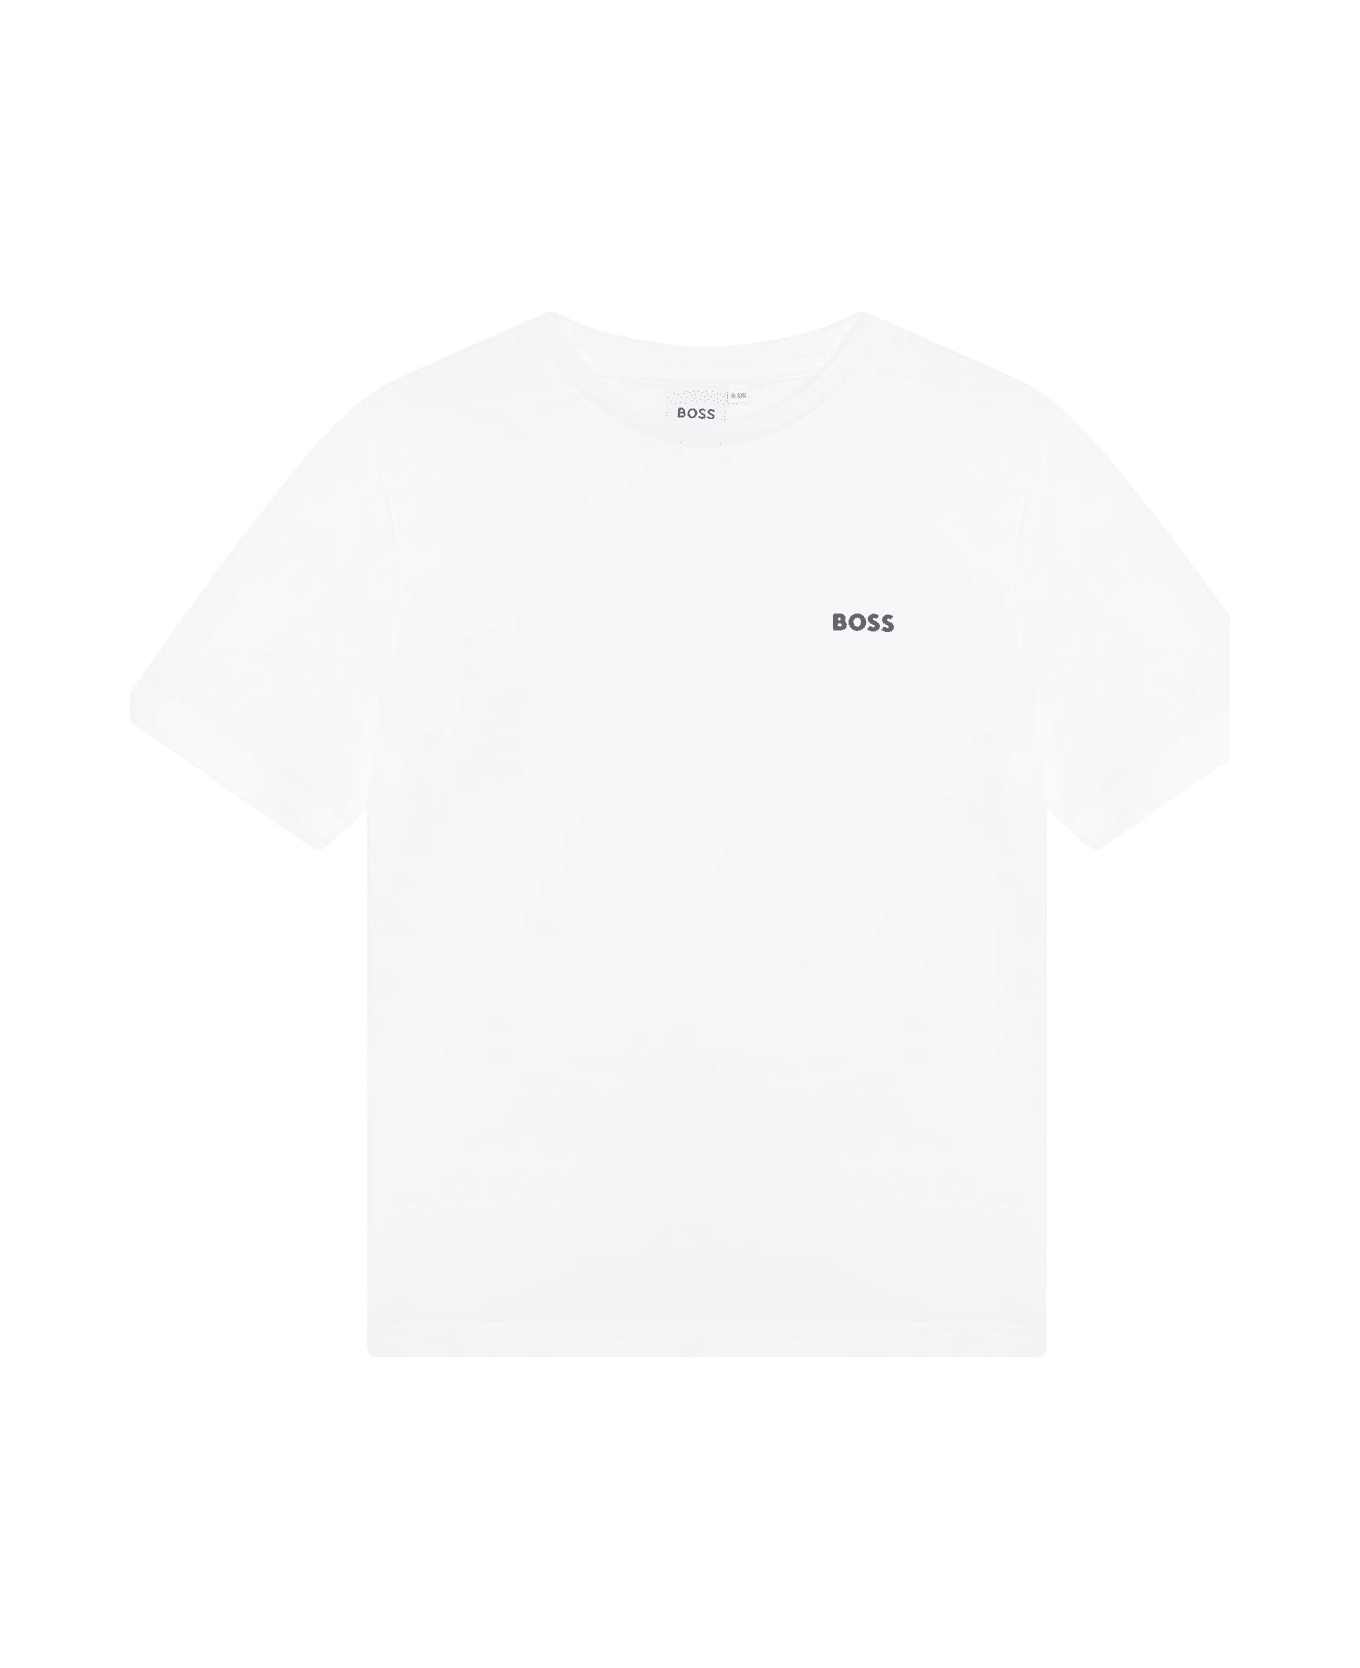 Hugo Boss T-shirt With Print - White Tシャツ＆ポロシャツ